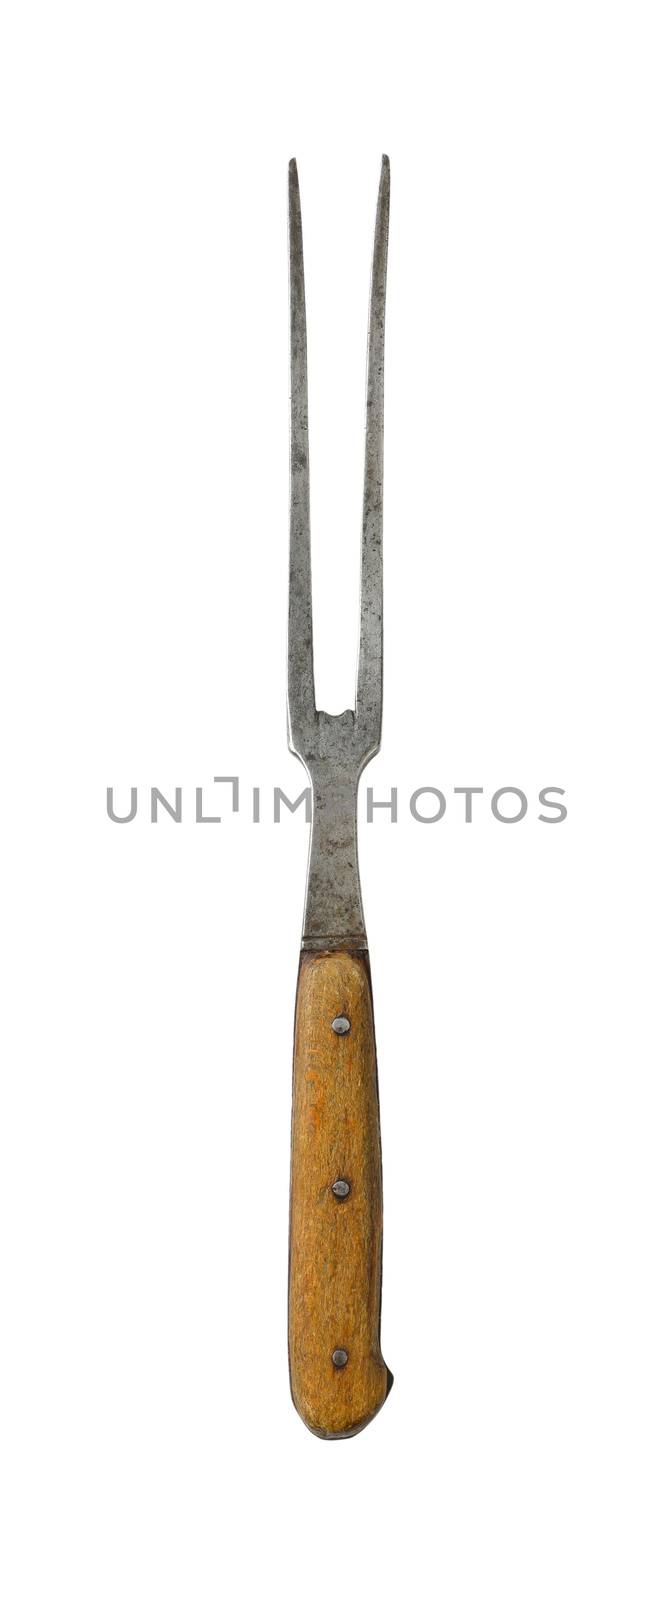 Old carving / meat fork with wood handle isolated on white